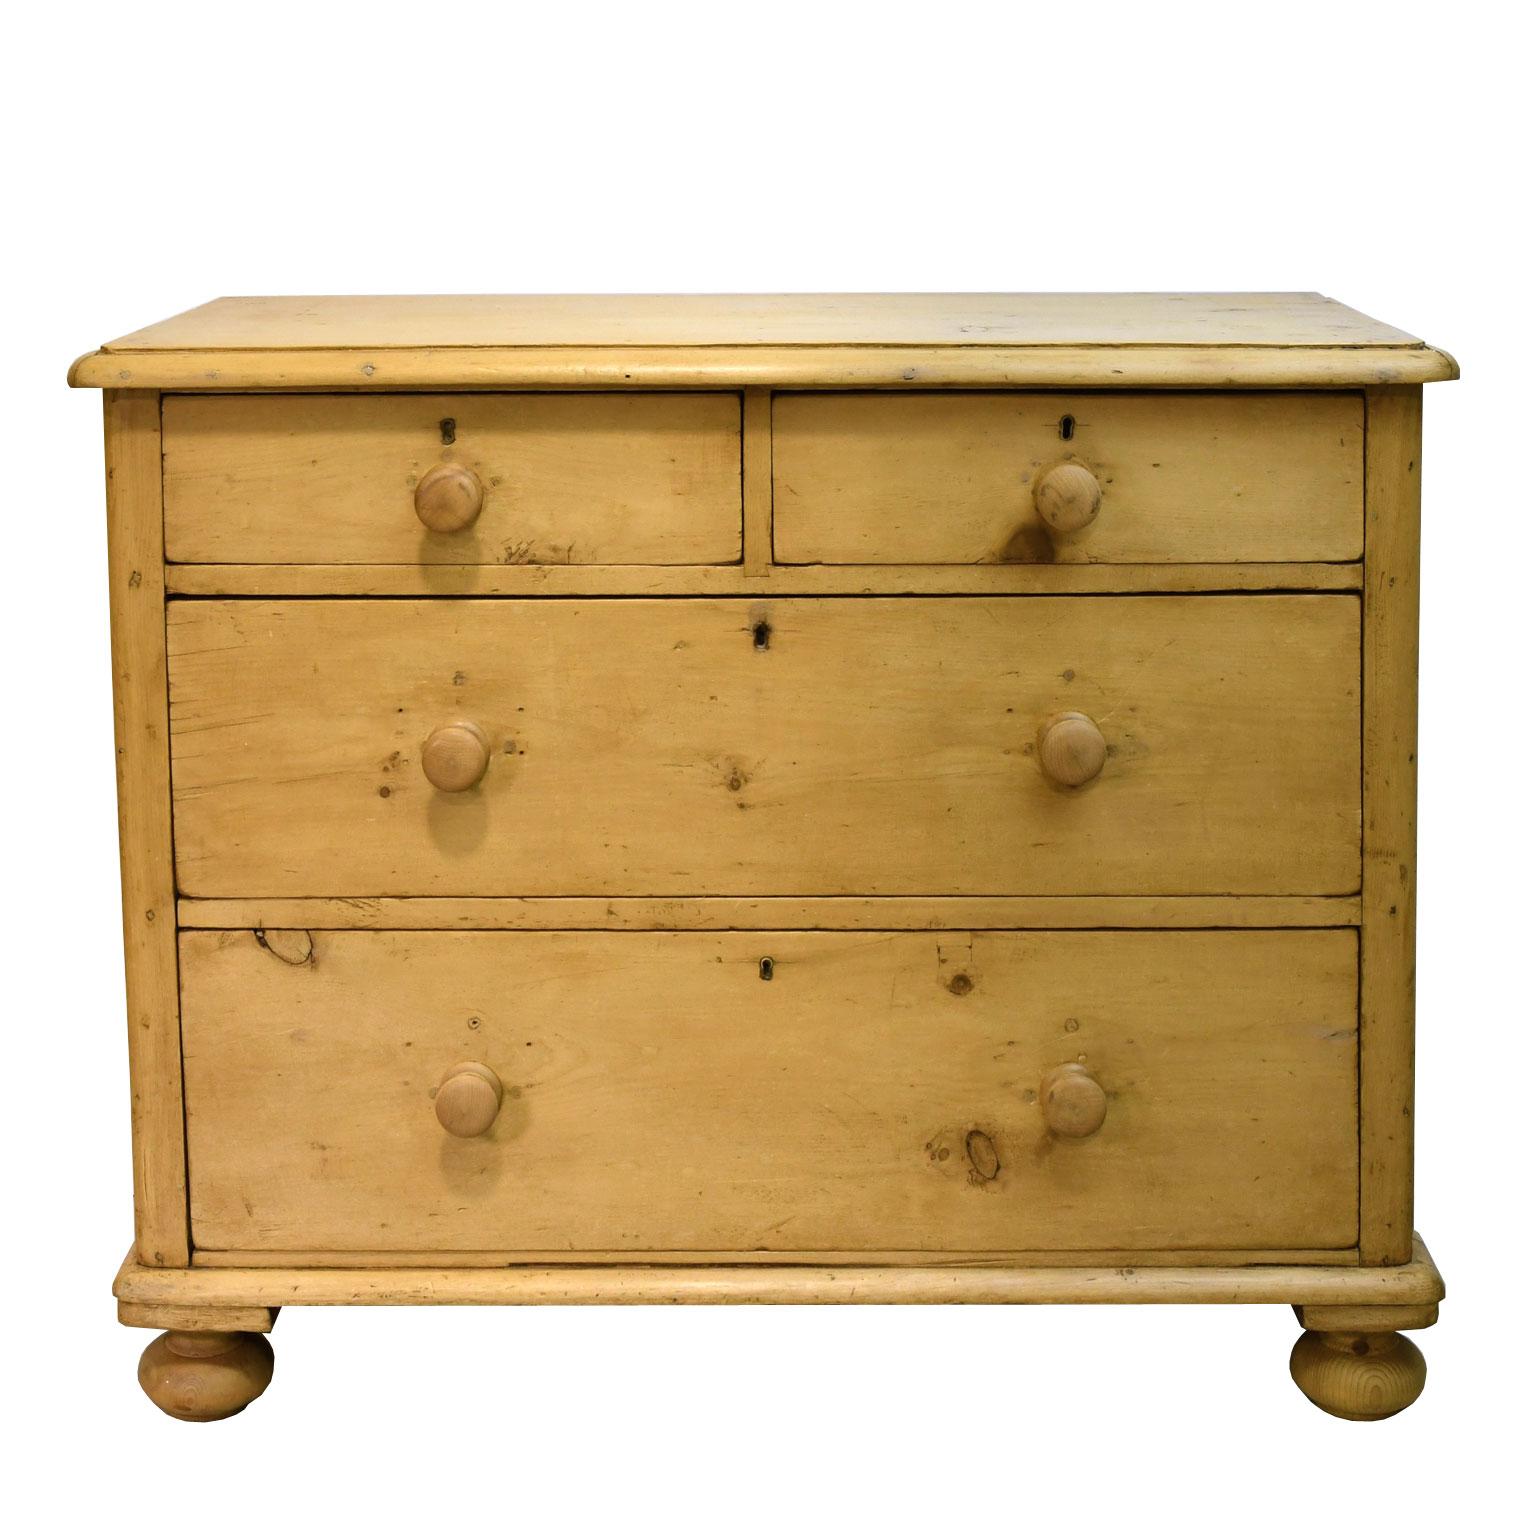 A country chest in natural, light-colored pine with two drawers over two larger drawers, all with turned wooden pulls and turned bun feet on the front. England, circa mid-1800s.
Measures: 42